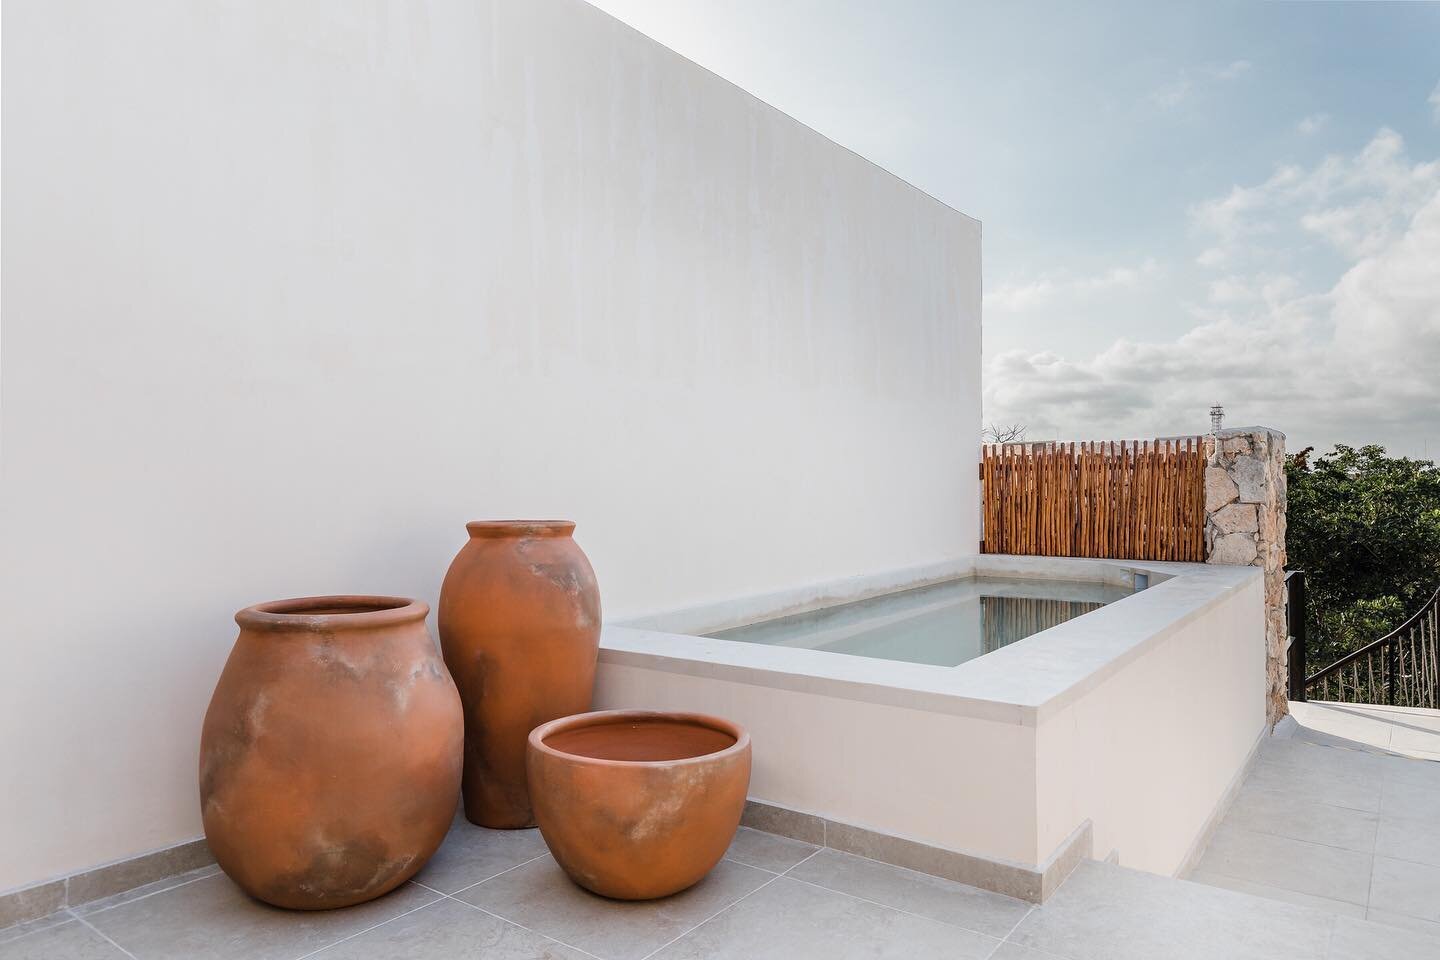 Large terracotta pots and a simple wooden fence add a pop of color, texture and some extra depth &amp; dimension to this poolside area 💧

From our Watal project.